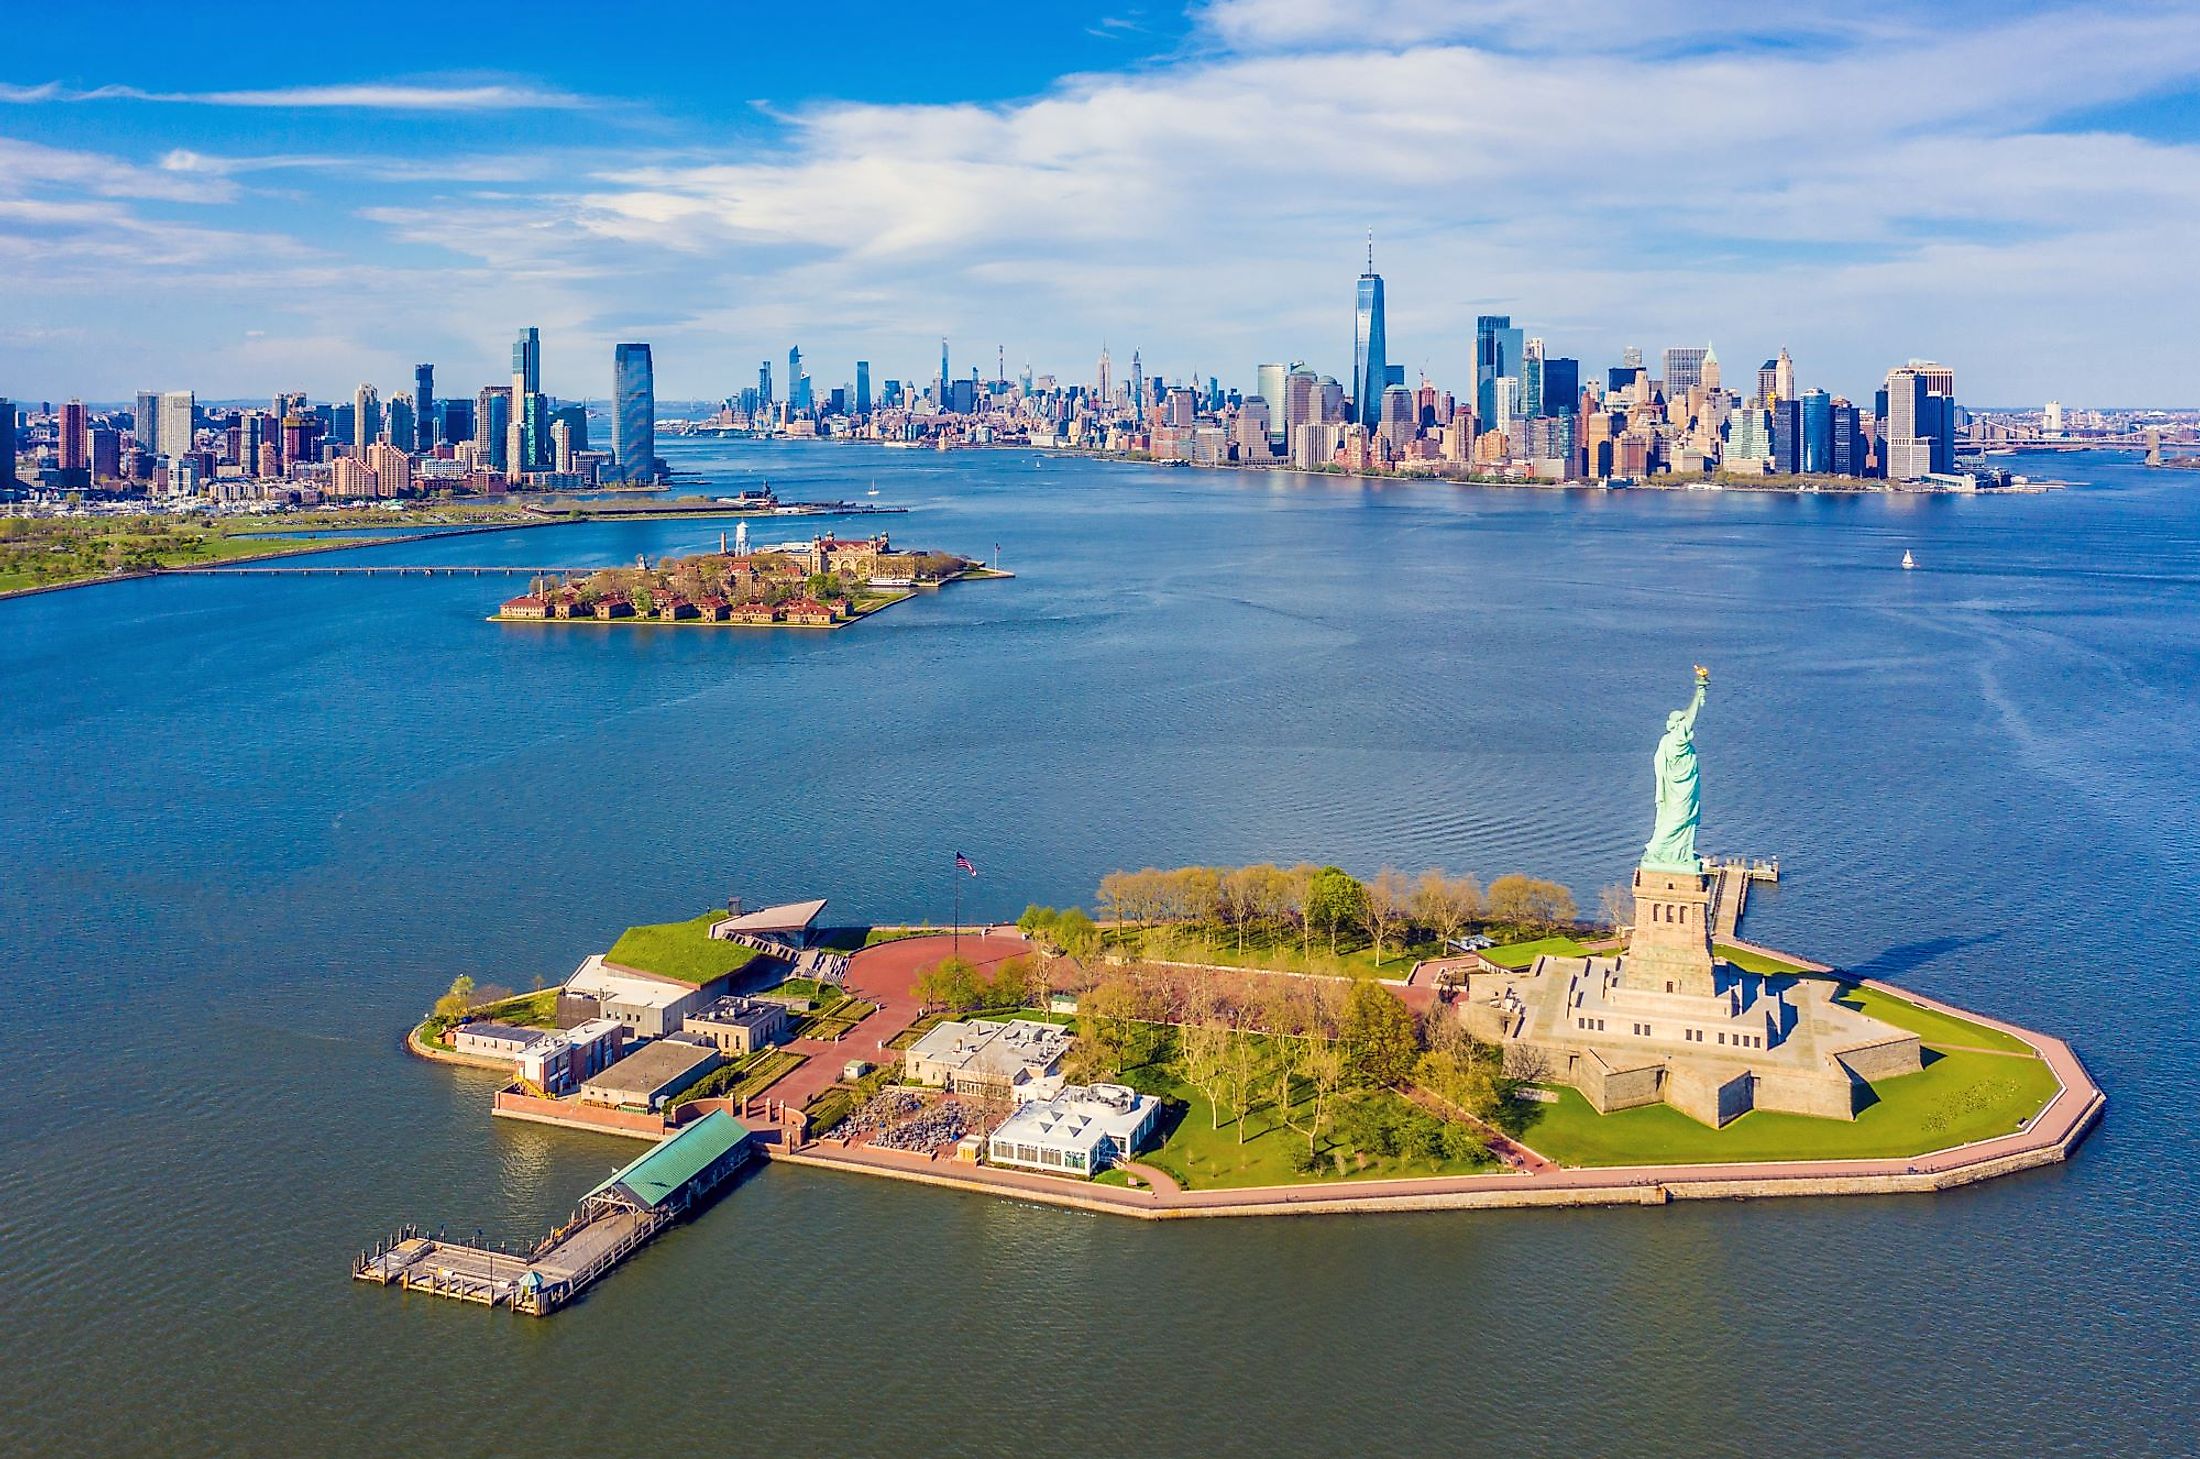 Aerial view of Statue of Liberty, Ellis Island, and Lower Manhattan skyline from New York Harbor near Liberty State Park in New Jersey. 